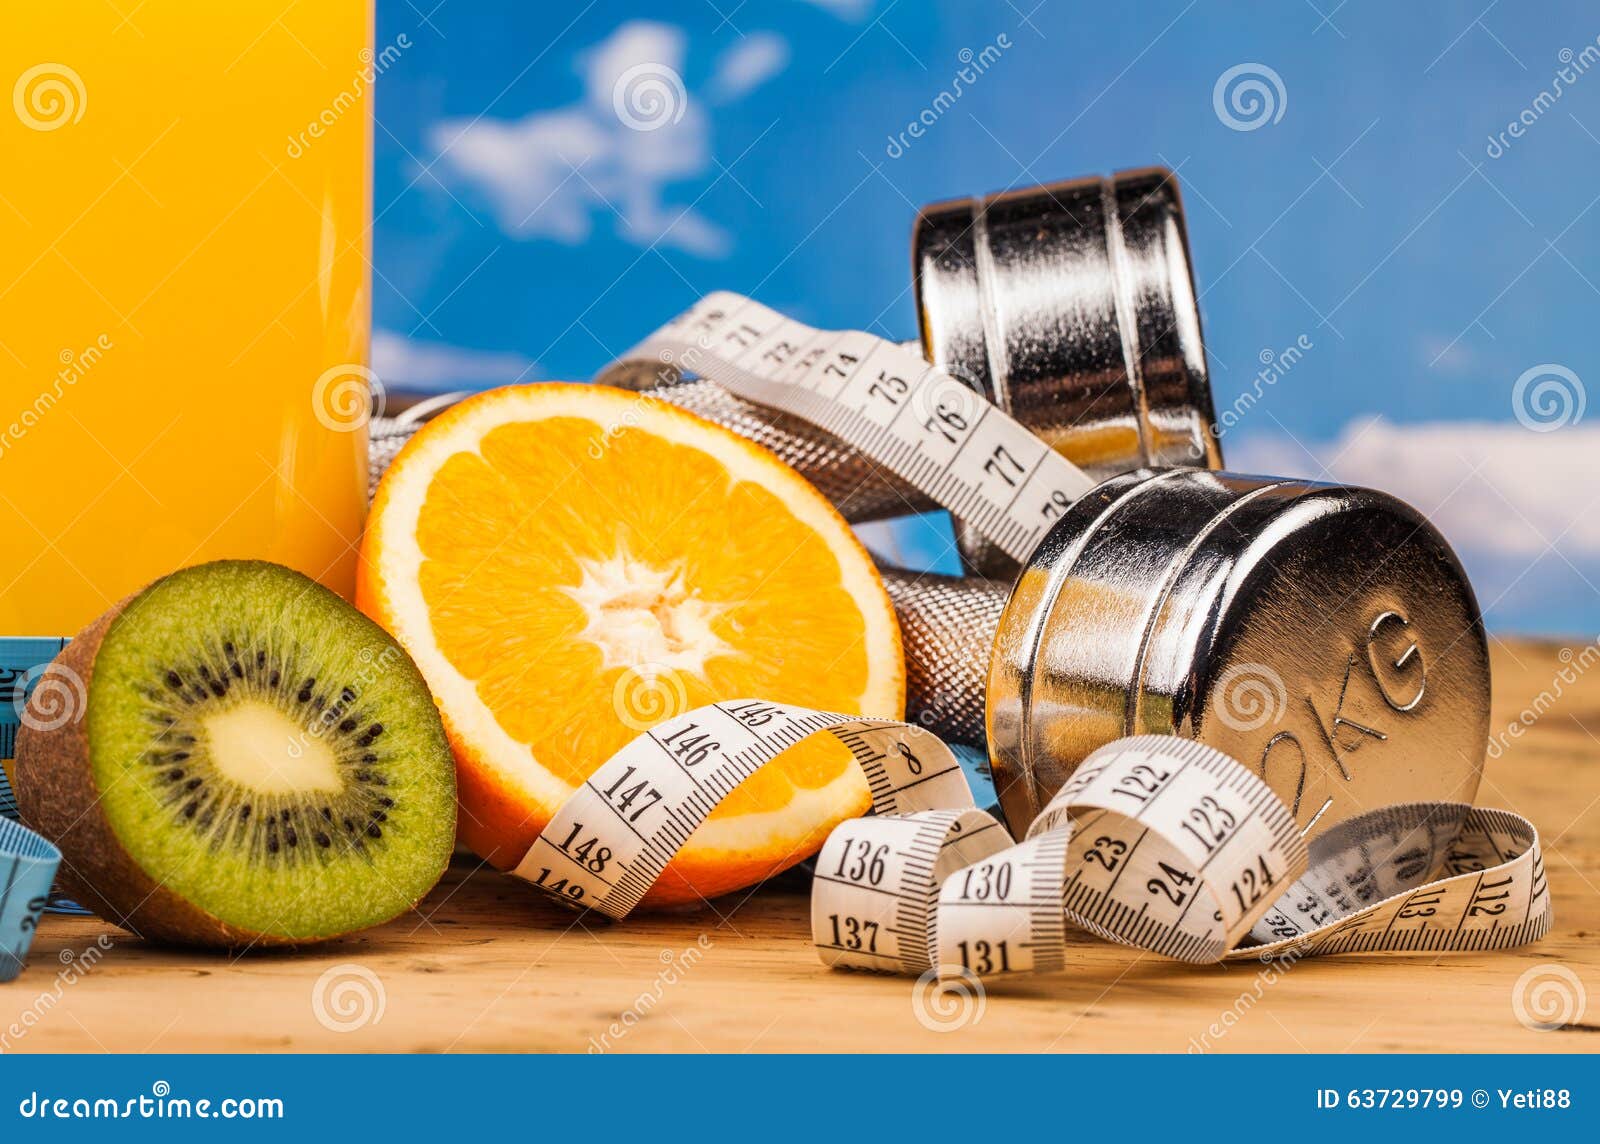 Fitness Equipment and Healthy Food Stock Image - Image of pumping ...